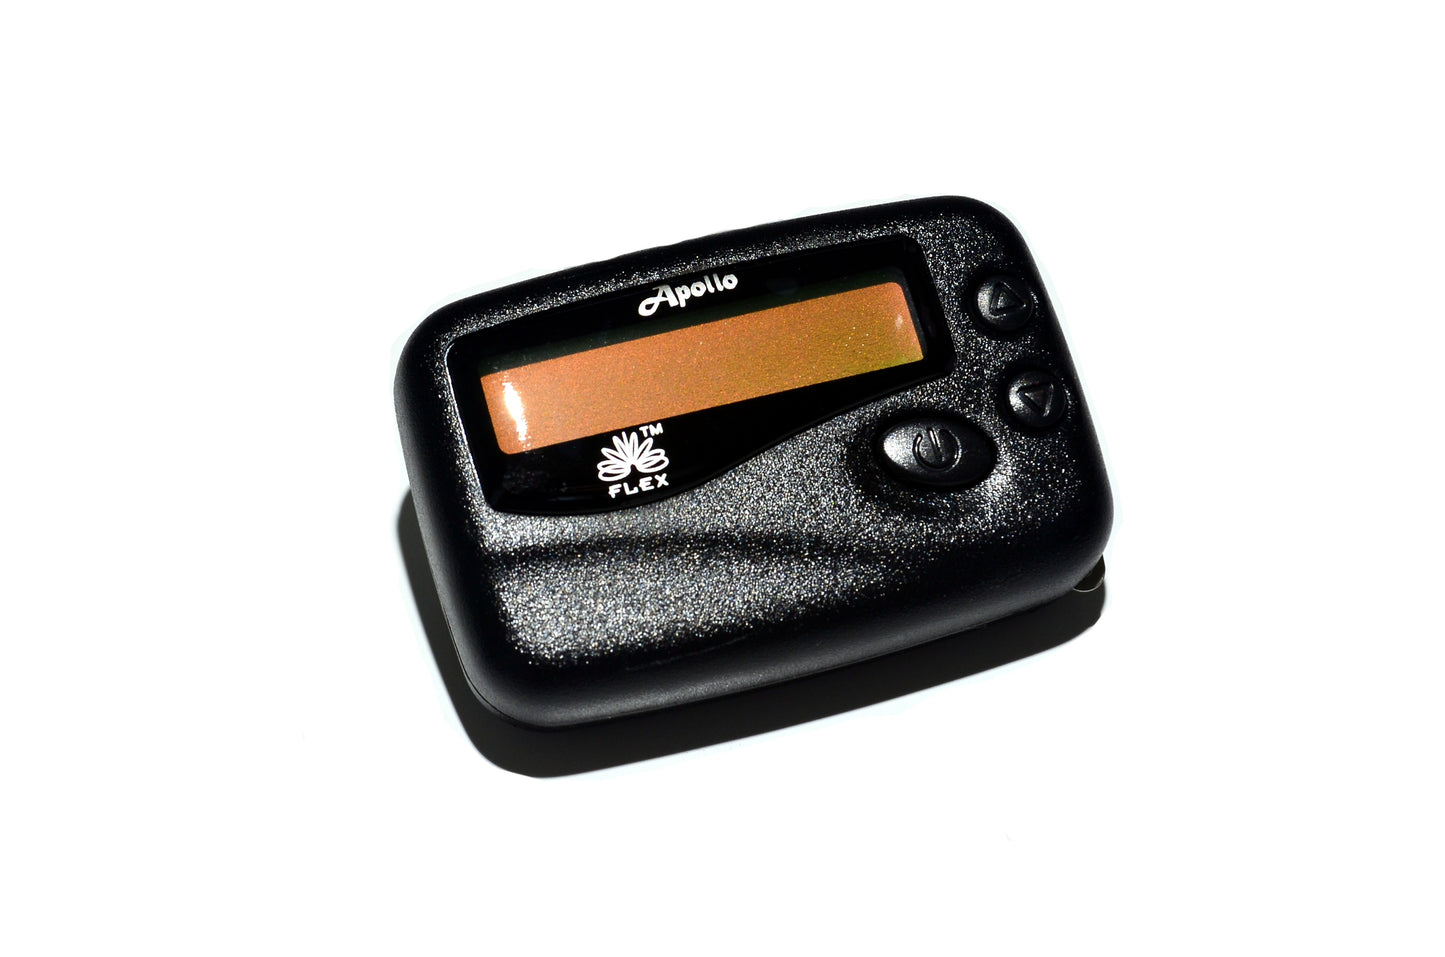 Apollo 202 1-Way Numeric Pager (Brand New) with Monthly Prepaid Service